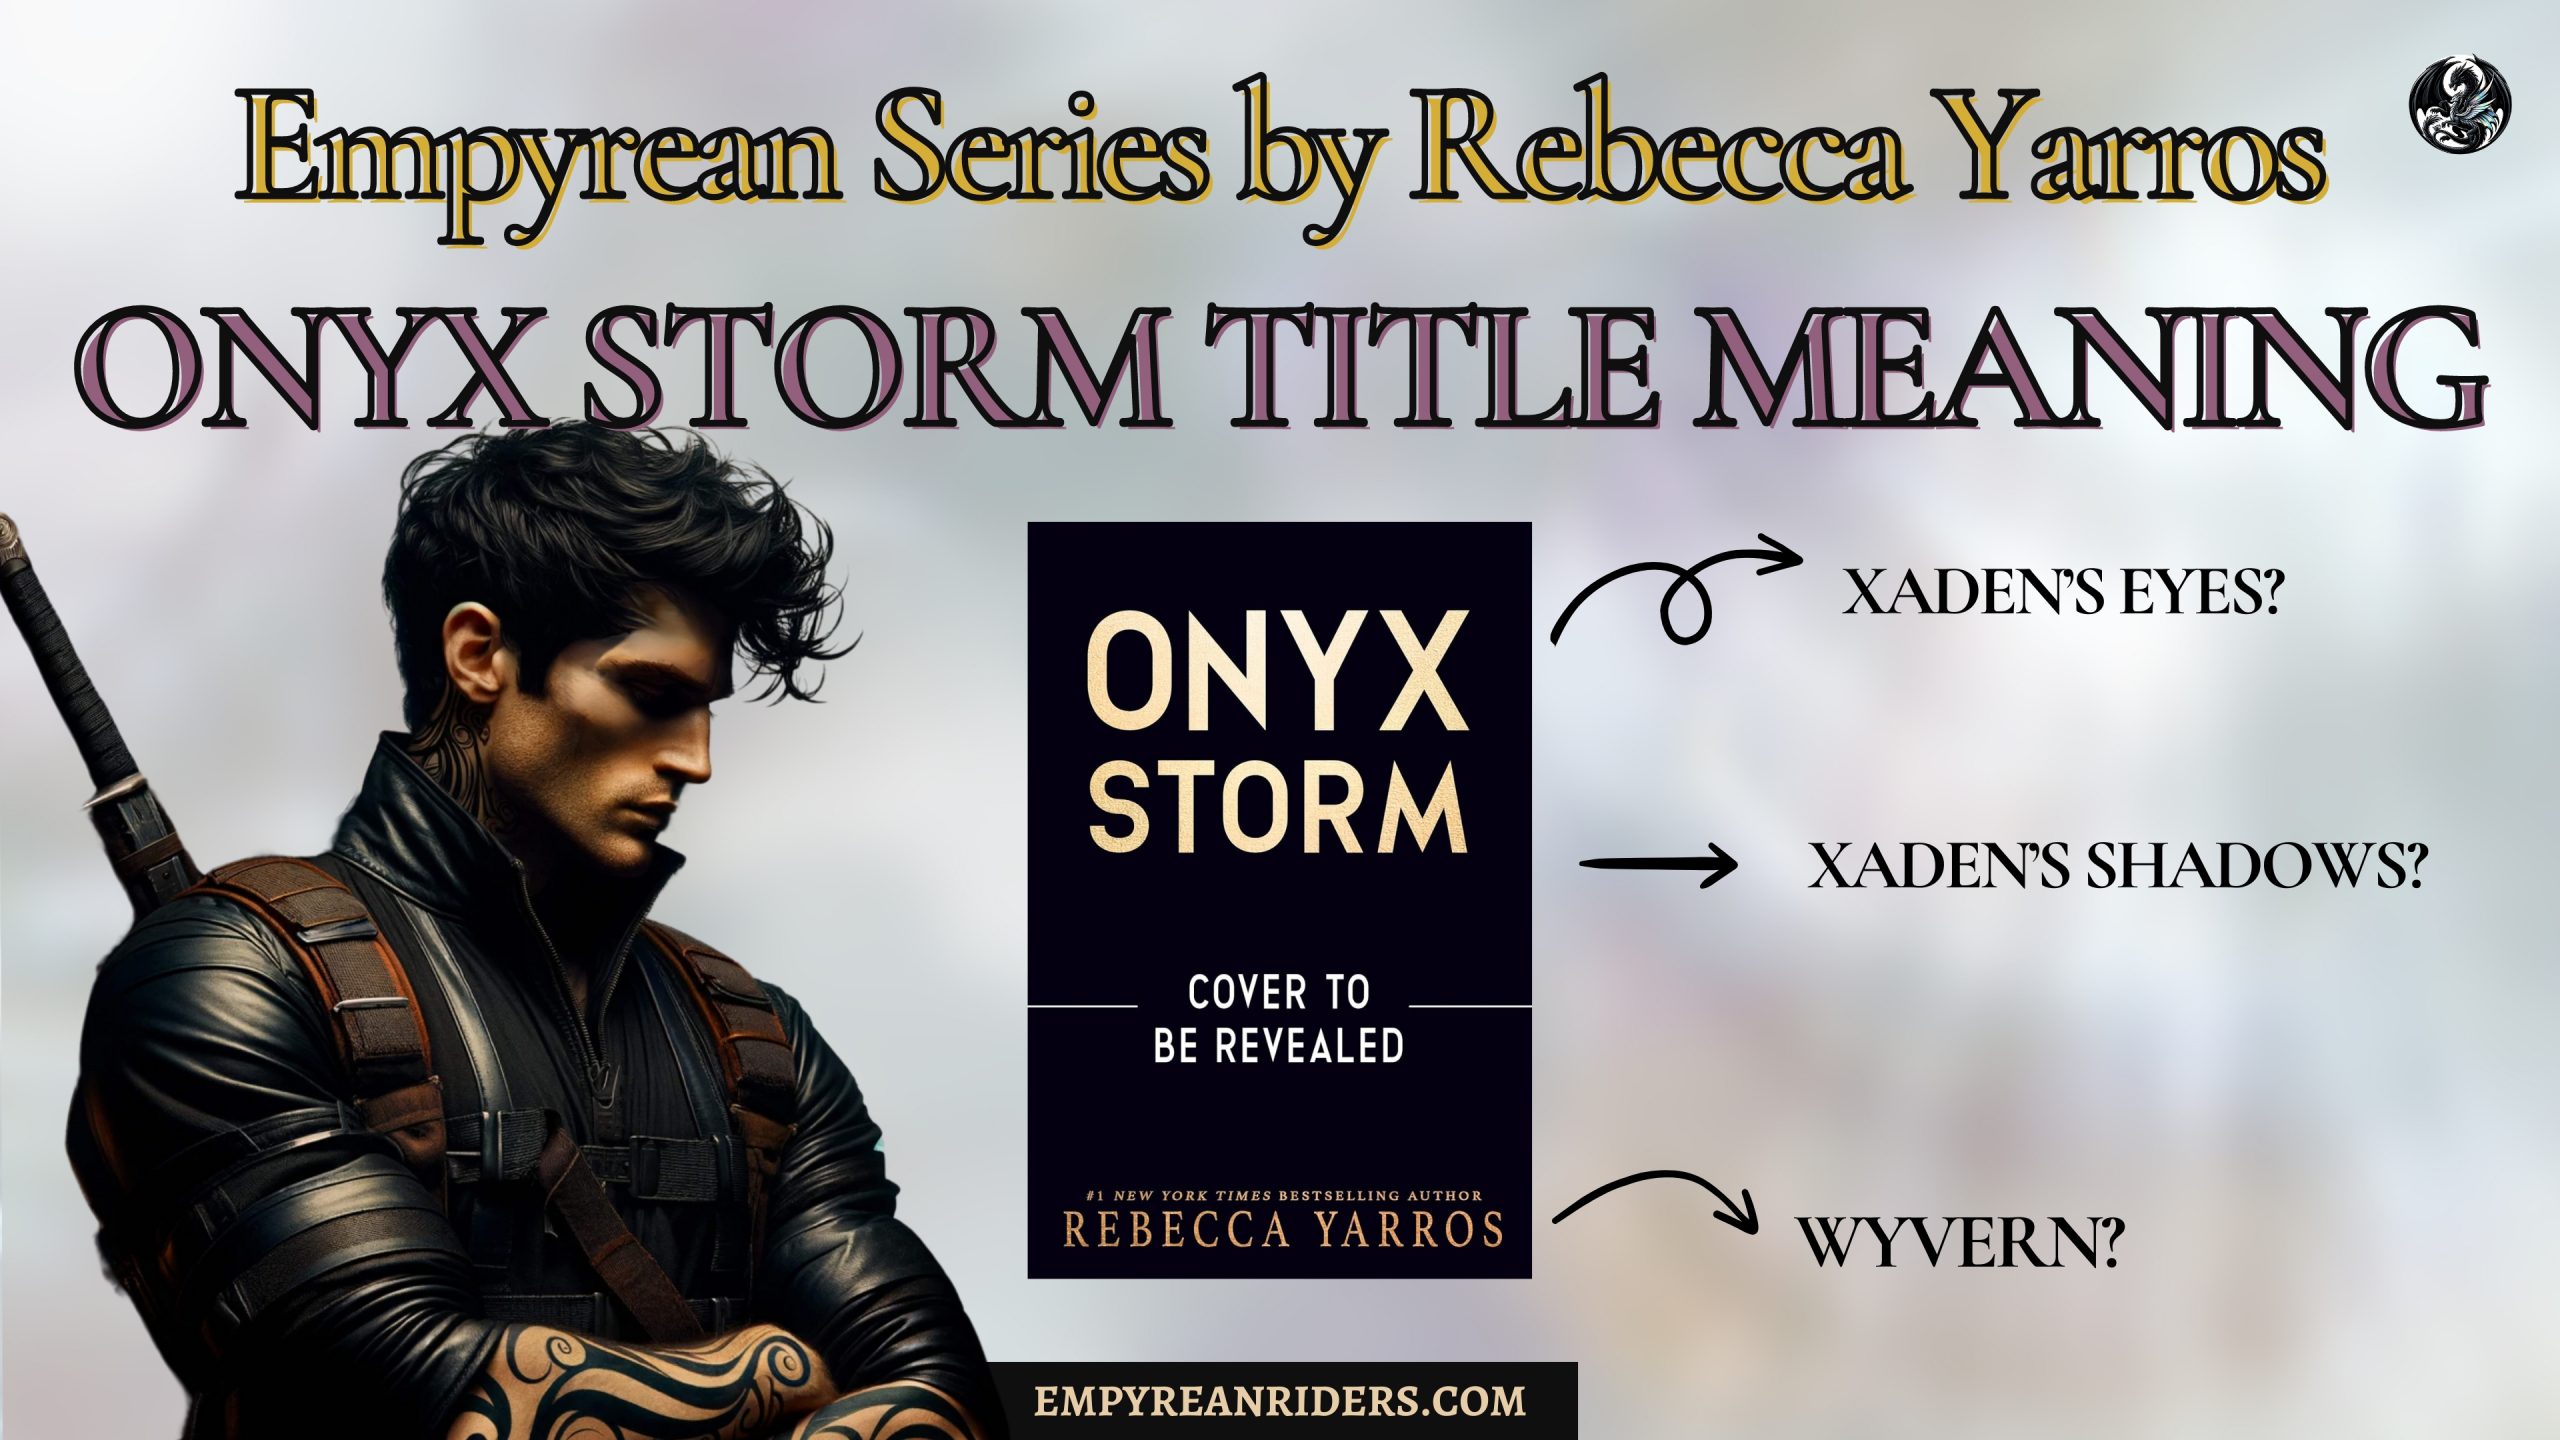 Rebecca Yarros Book 3 – Onyx Storm Title Meaning